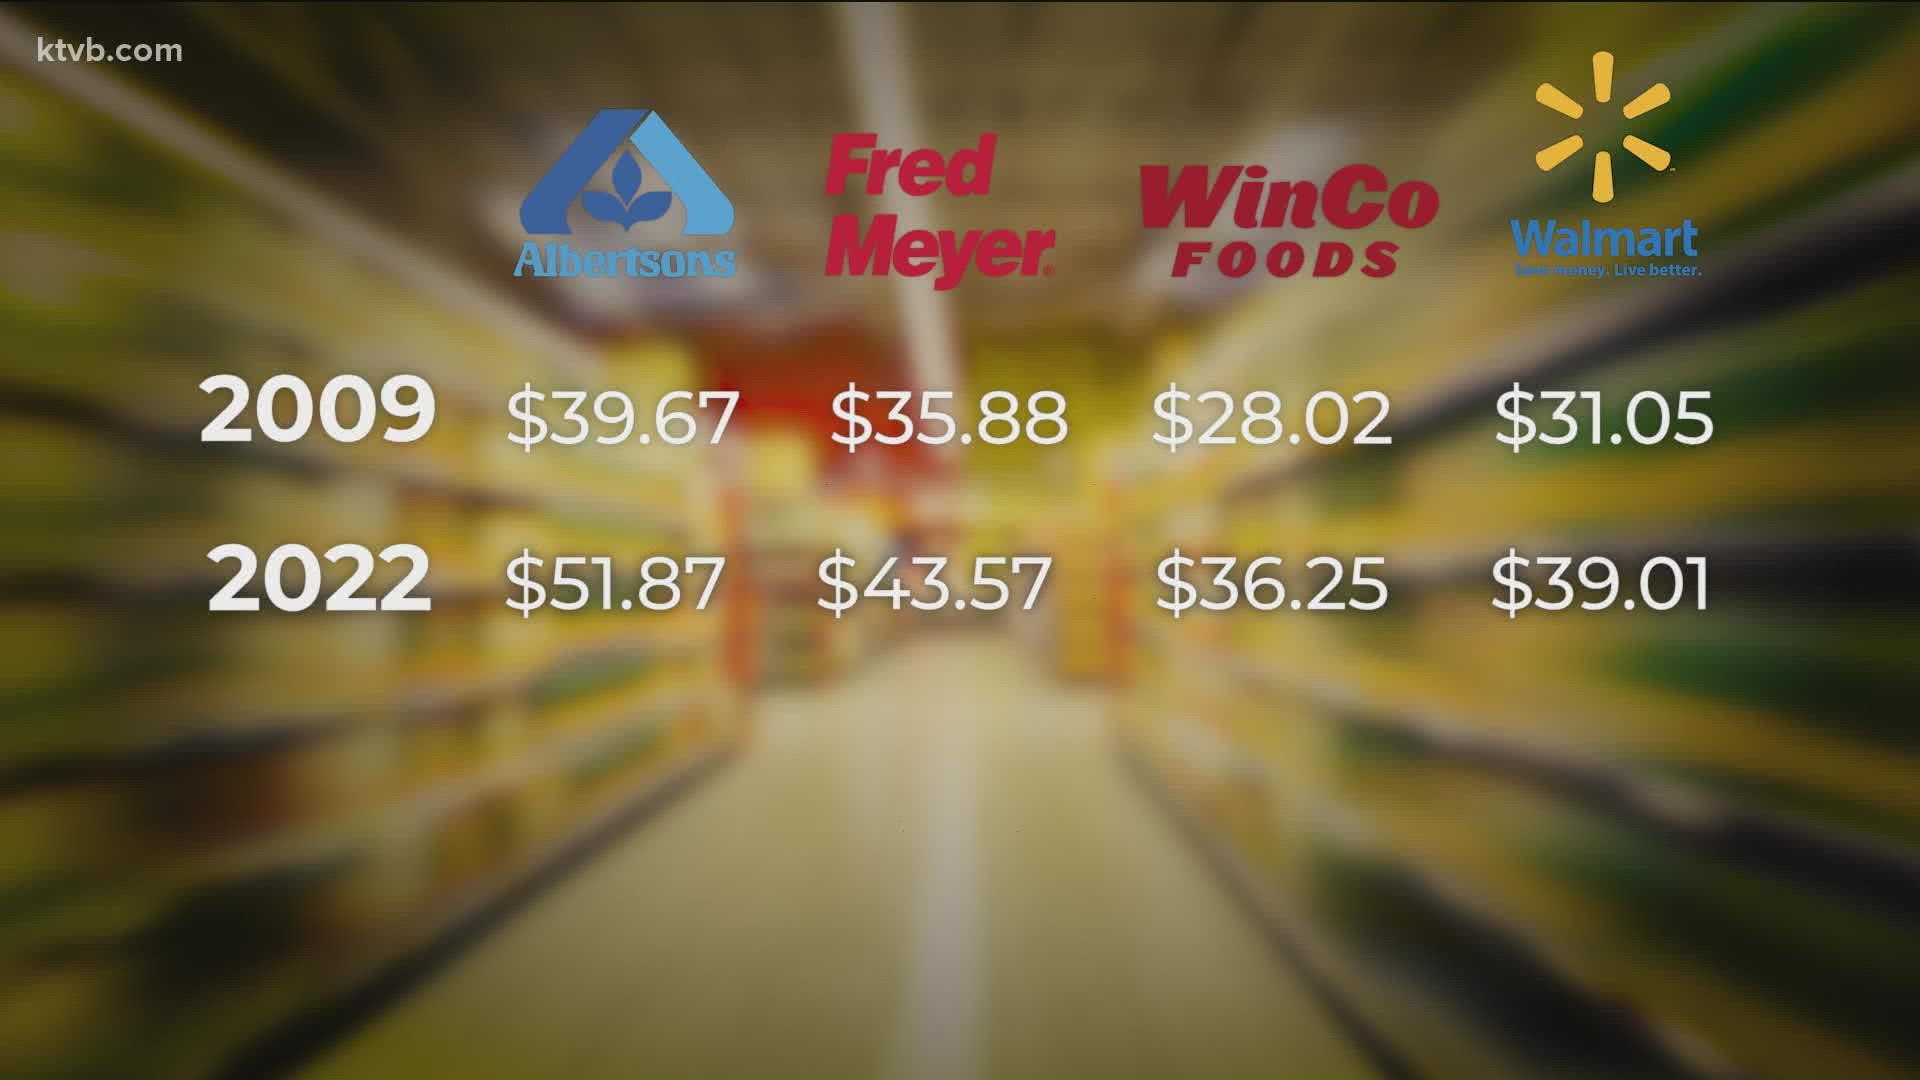 In 2009, KTVB collected prices for 13 items at Albertsons, Fred Meyer, Winco and Walmart. 13 years later, the 208 compares those prices to today's costs.